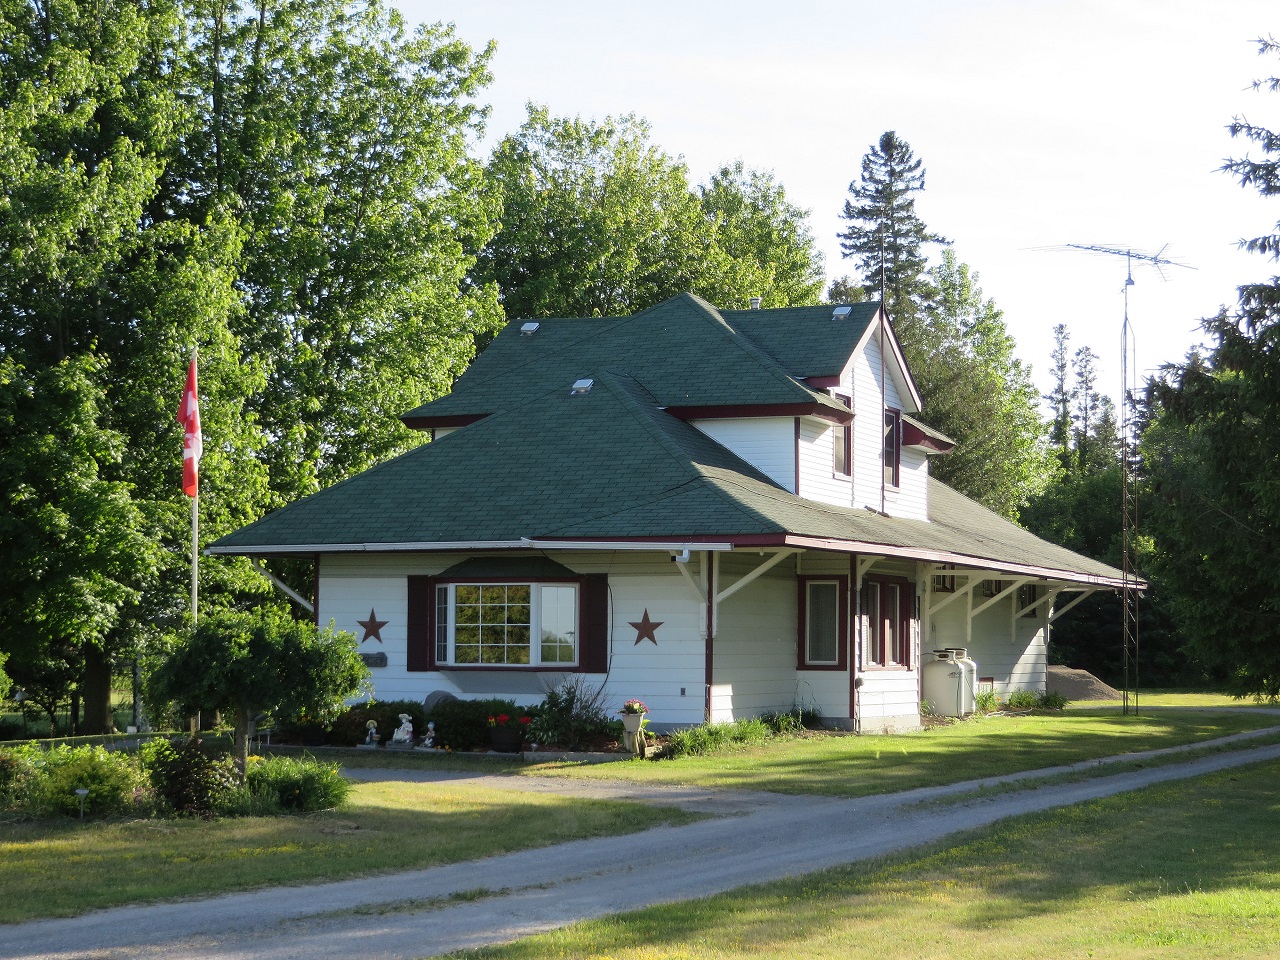 The former Georgian Bay and Seaboard station at Eldon is enjoying a nice retirement as a residence. This section of the Port McNicoll sub was abandoned in 1930.